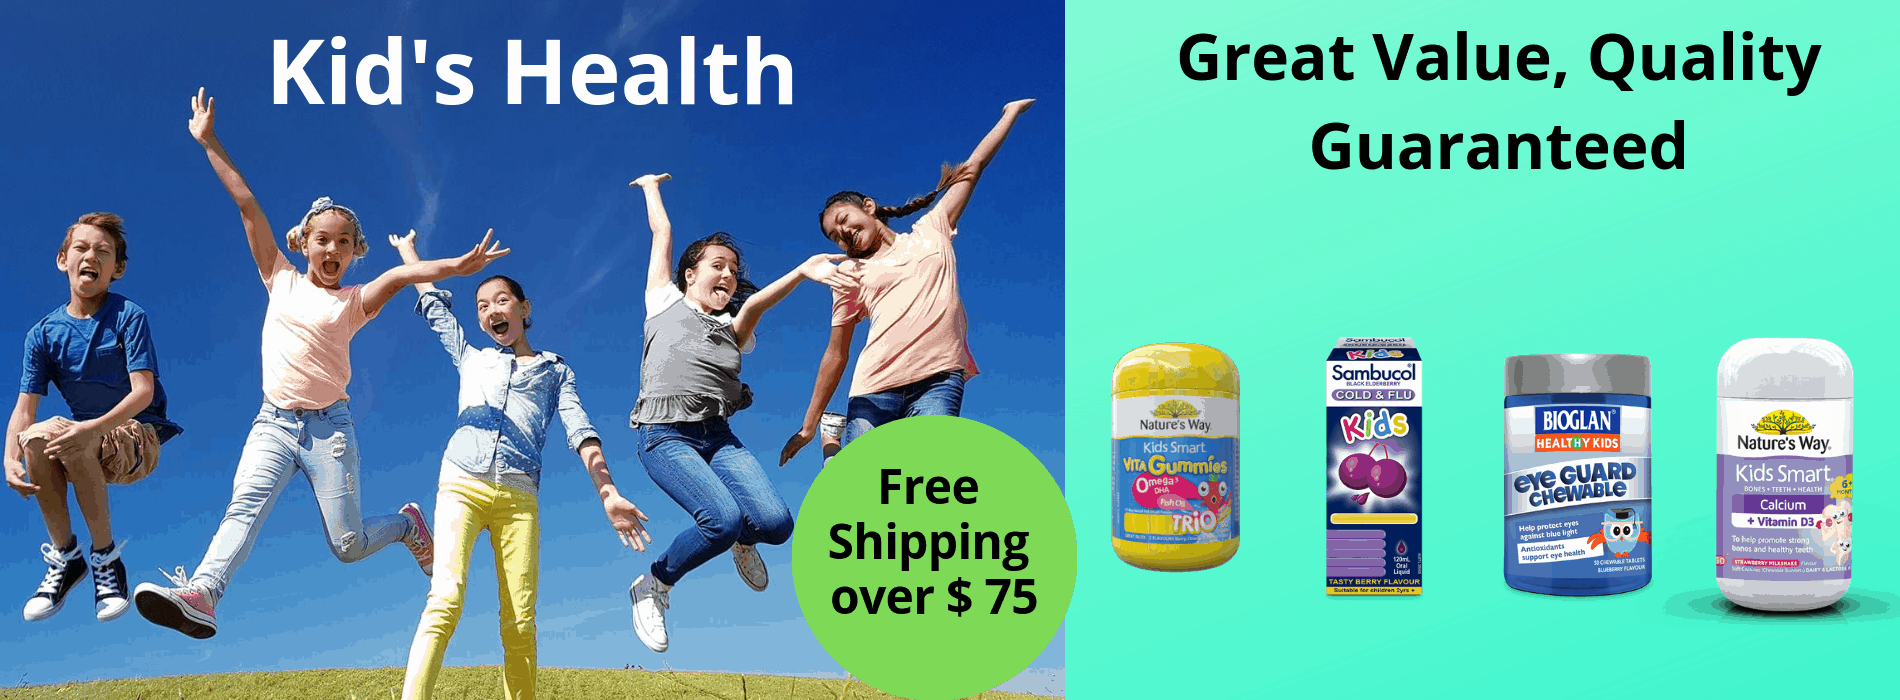 Care for Kids Health - Great Value & Quality